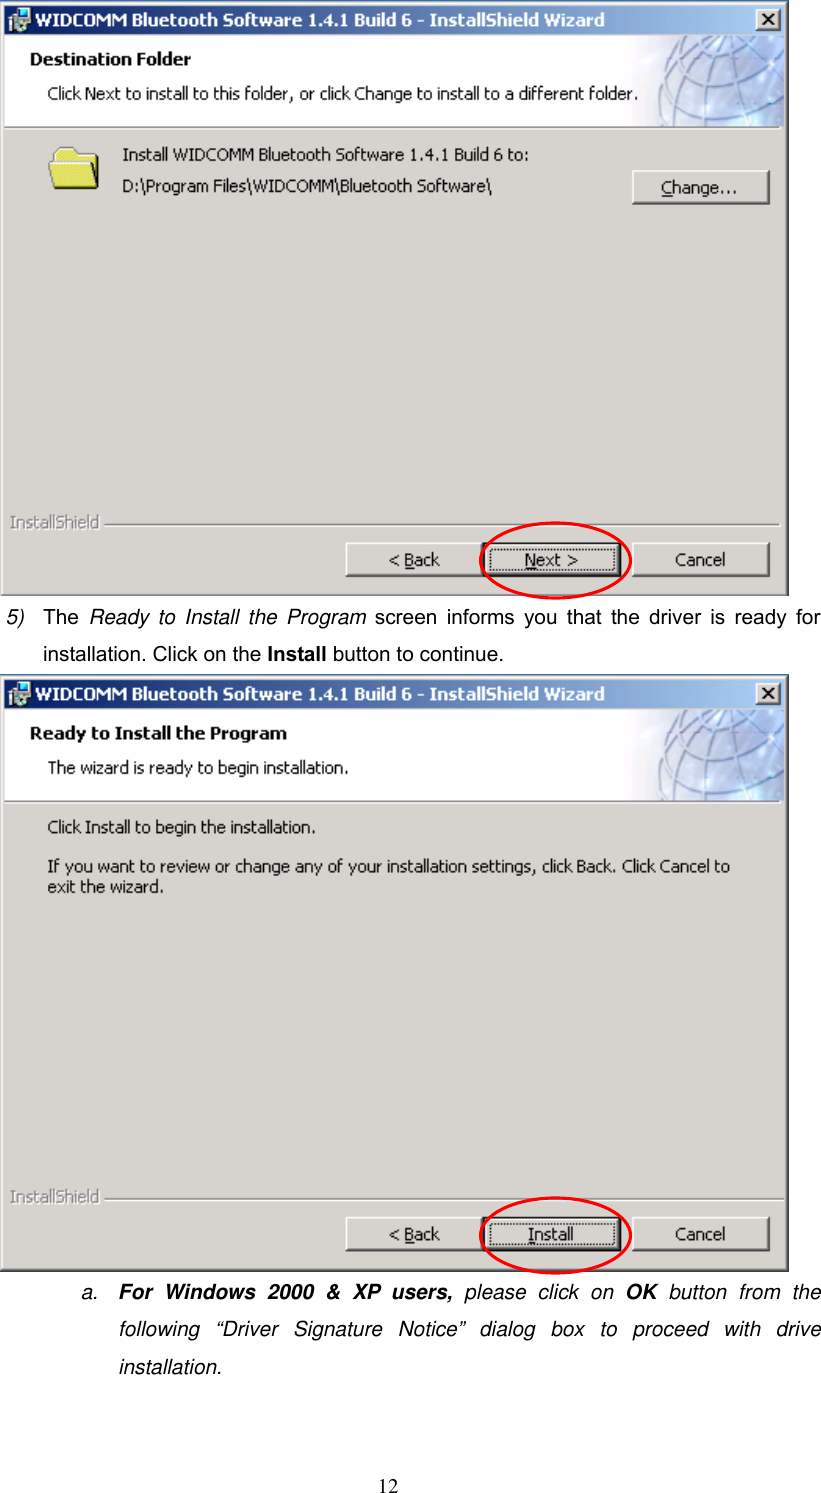  5)  The Ready to Install the Program screen informs you that the driver is ready for installation. Click on the Install button to continue.    a.  For Windows 2000 &amp; XP users, please click on OK button from the following “Driver Signature Notice” dialog box to proceed with drive installation.  12 